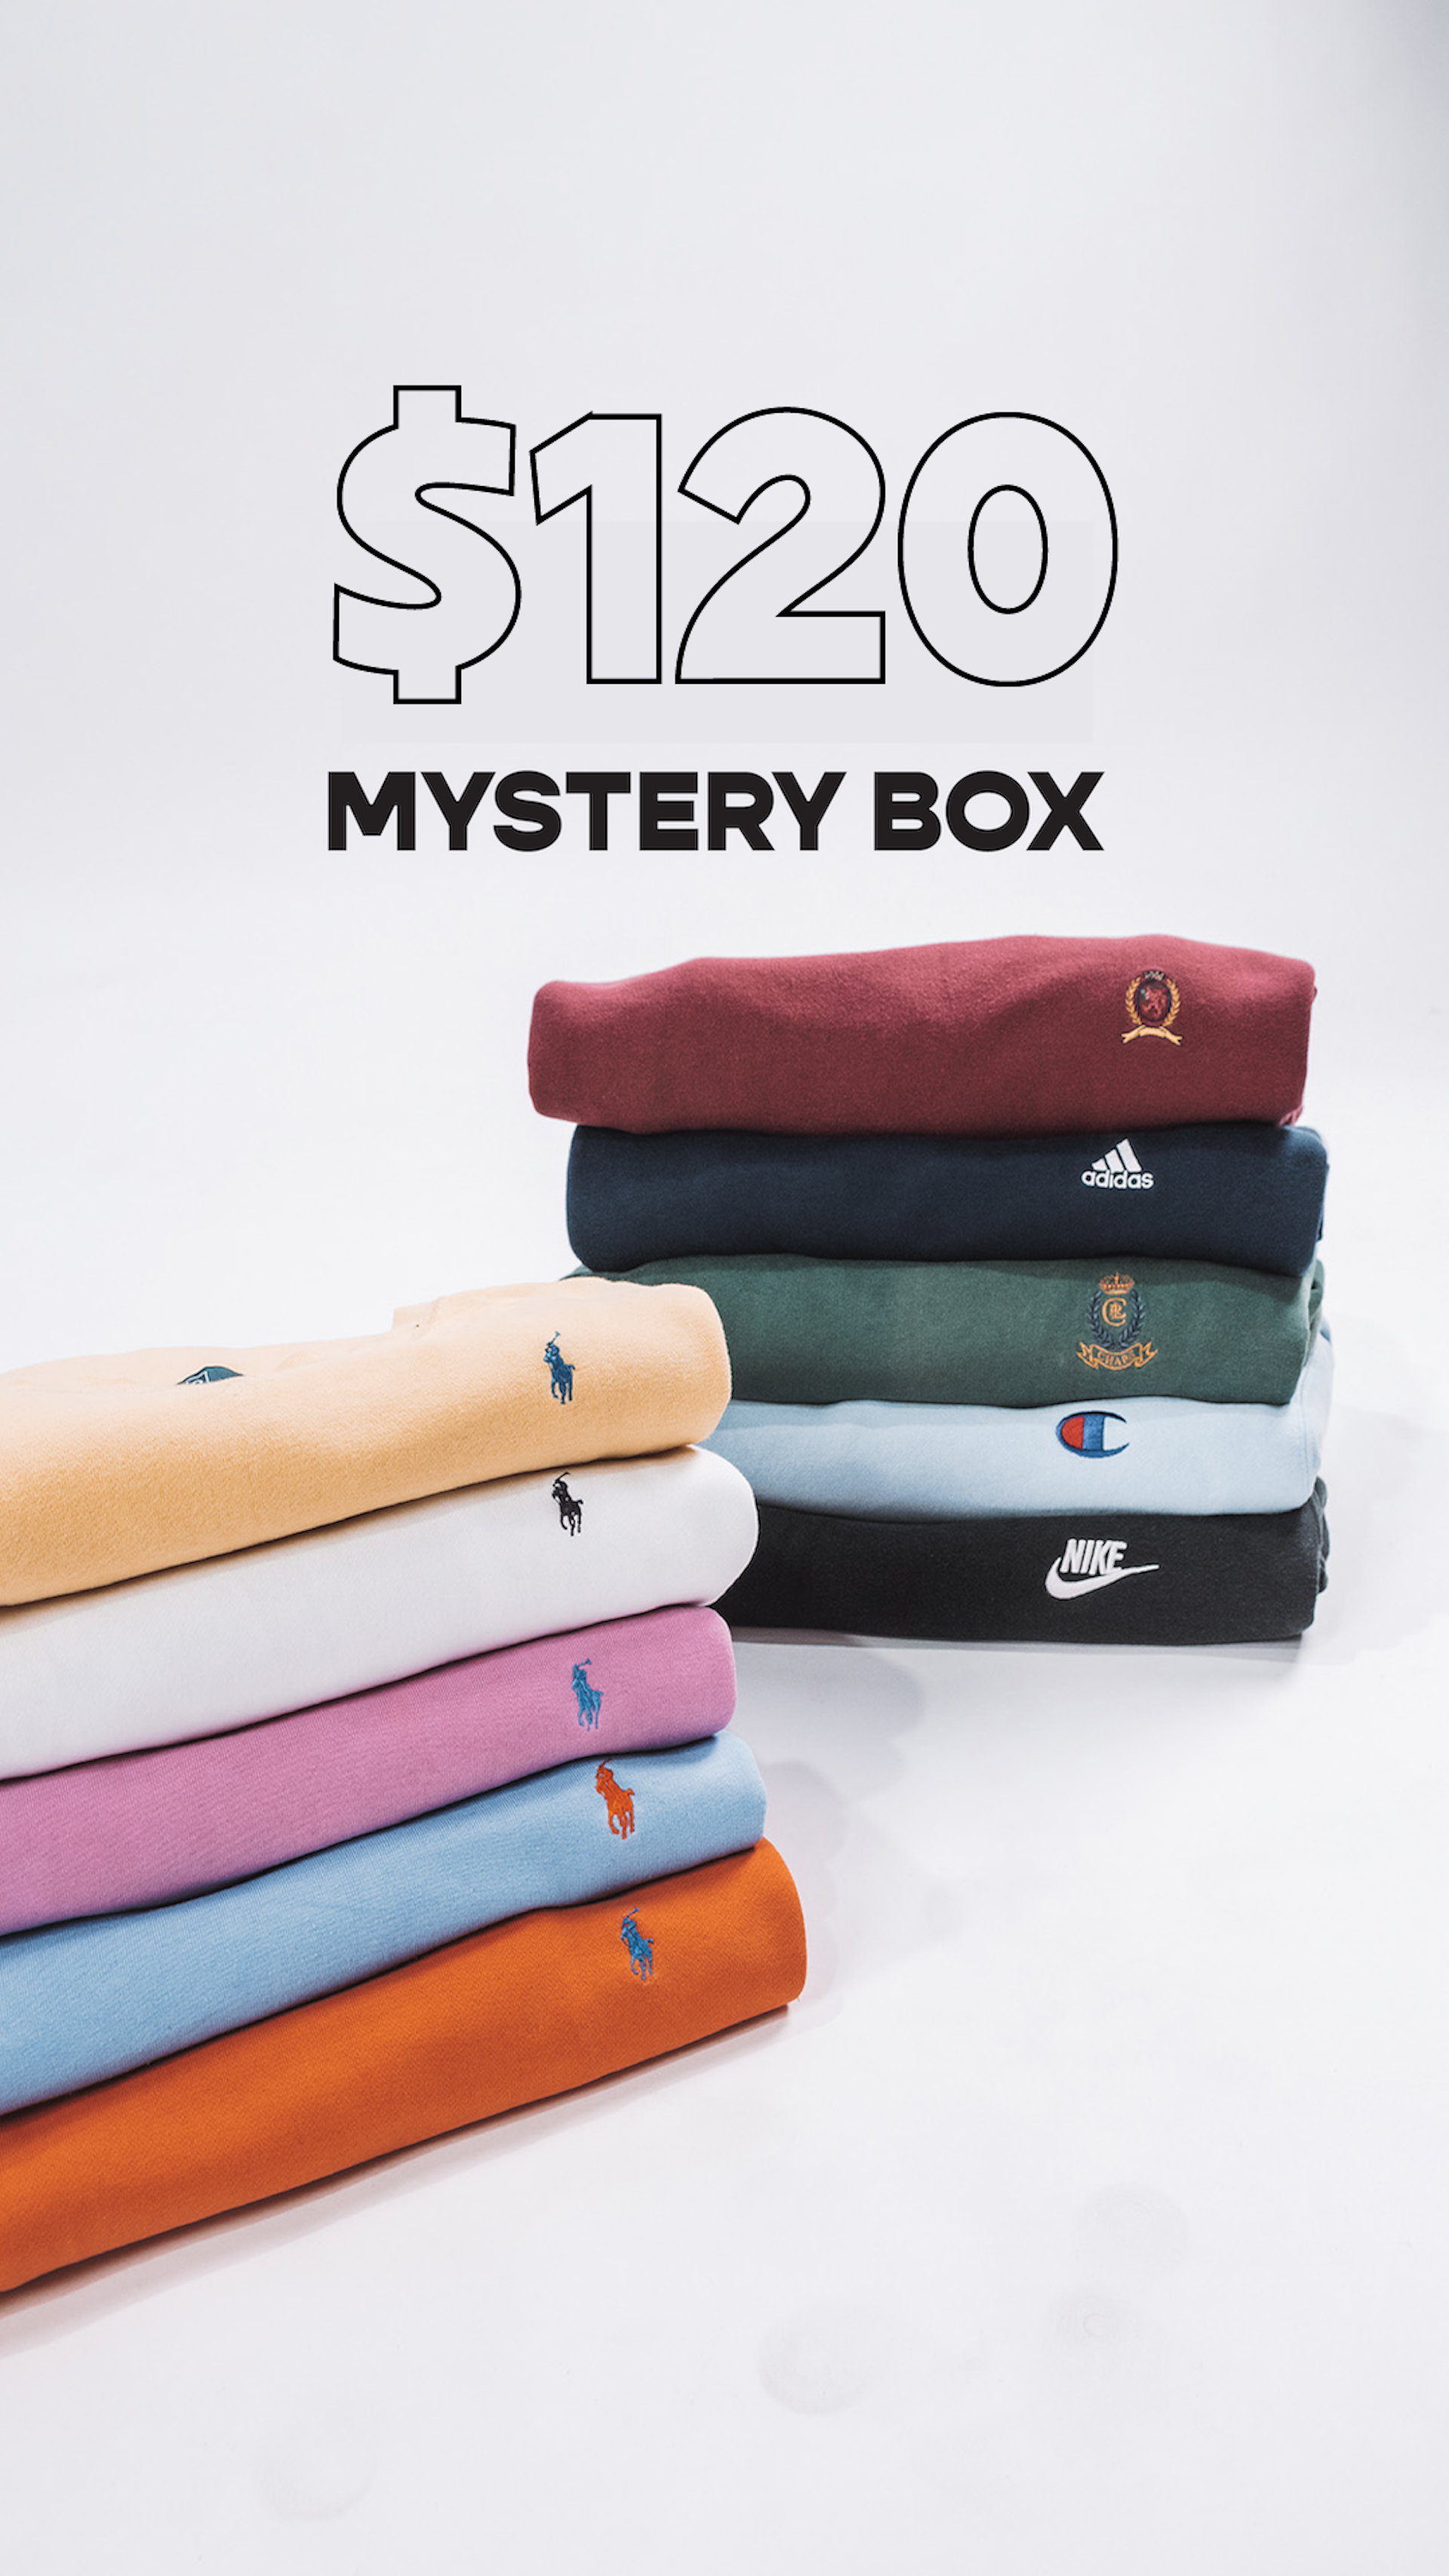 RESTATED VINTAGE $120 MYSTERY BOX